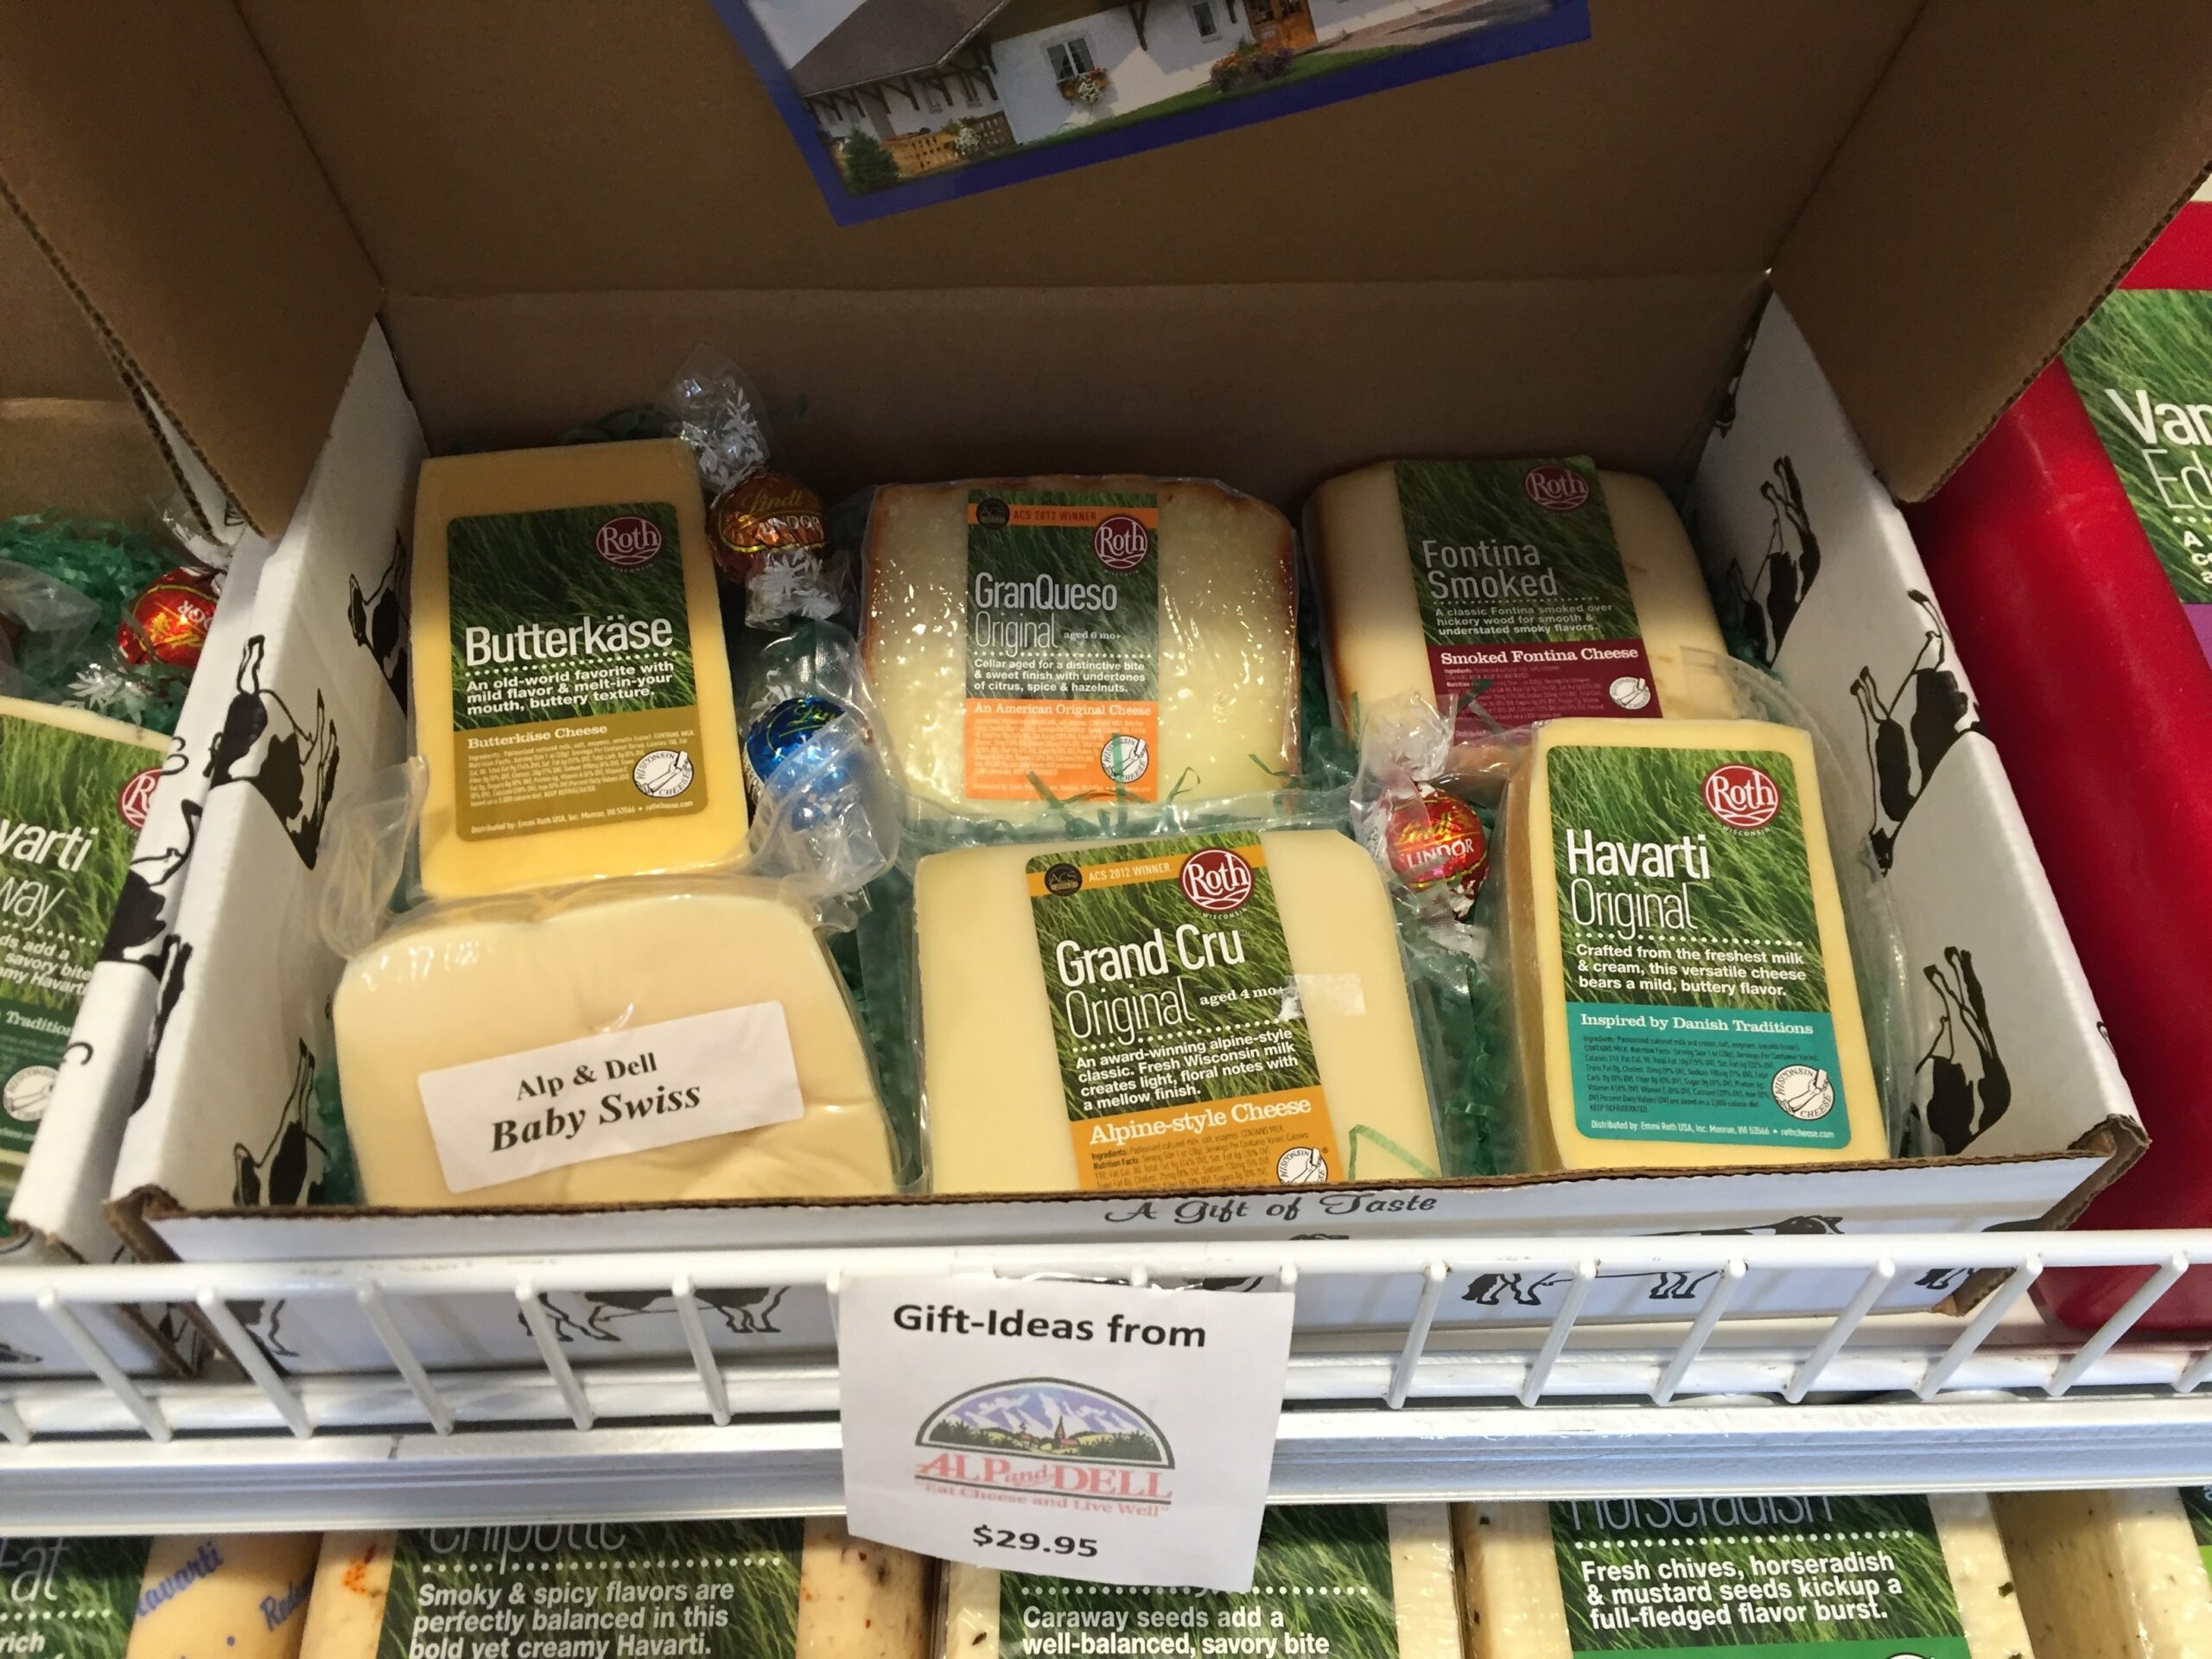 Emmi Roth cheeses are shown in a gift box